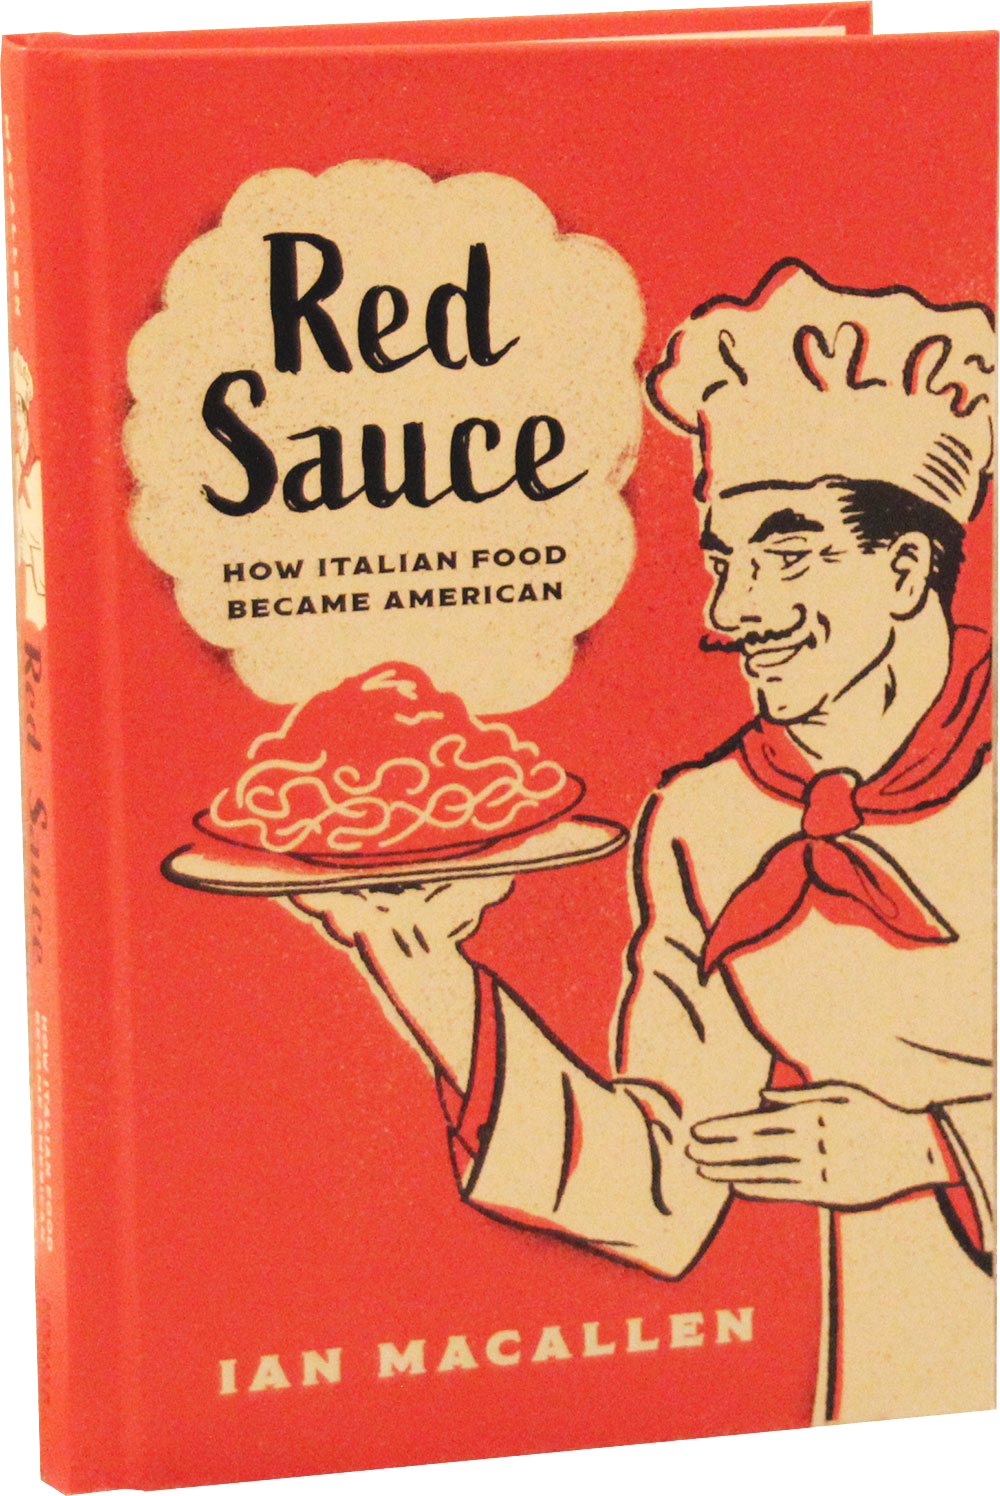 The cover image of Red Sauce - How Italian Food Became American